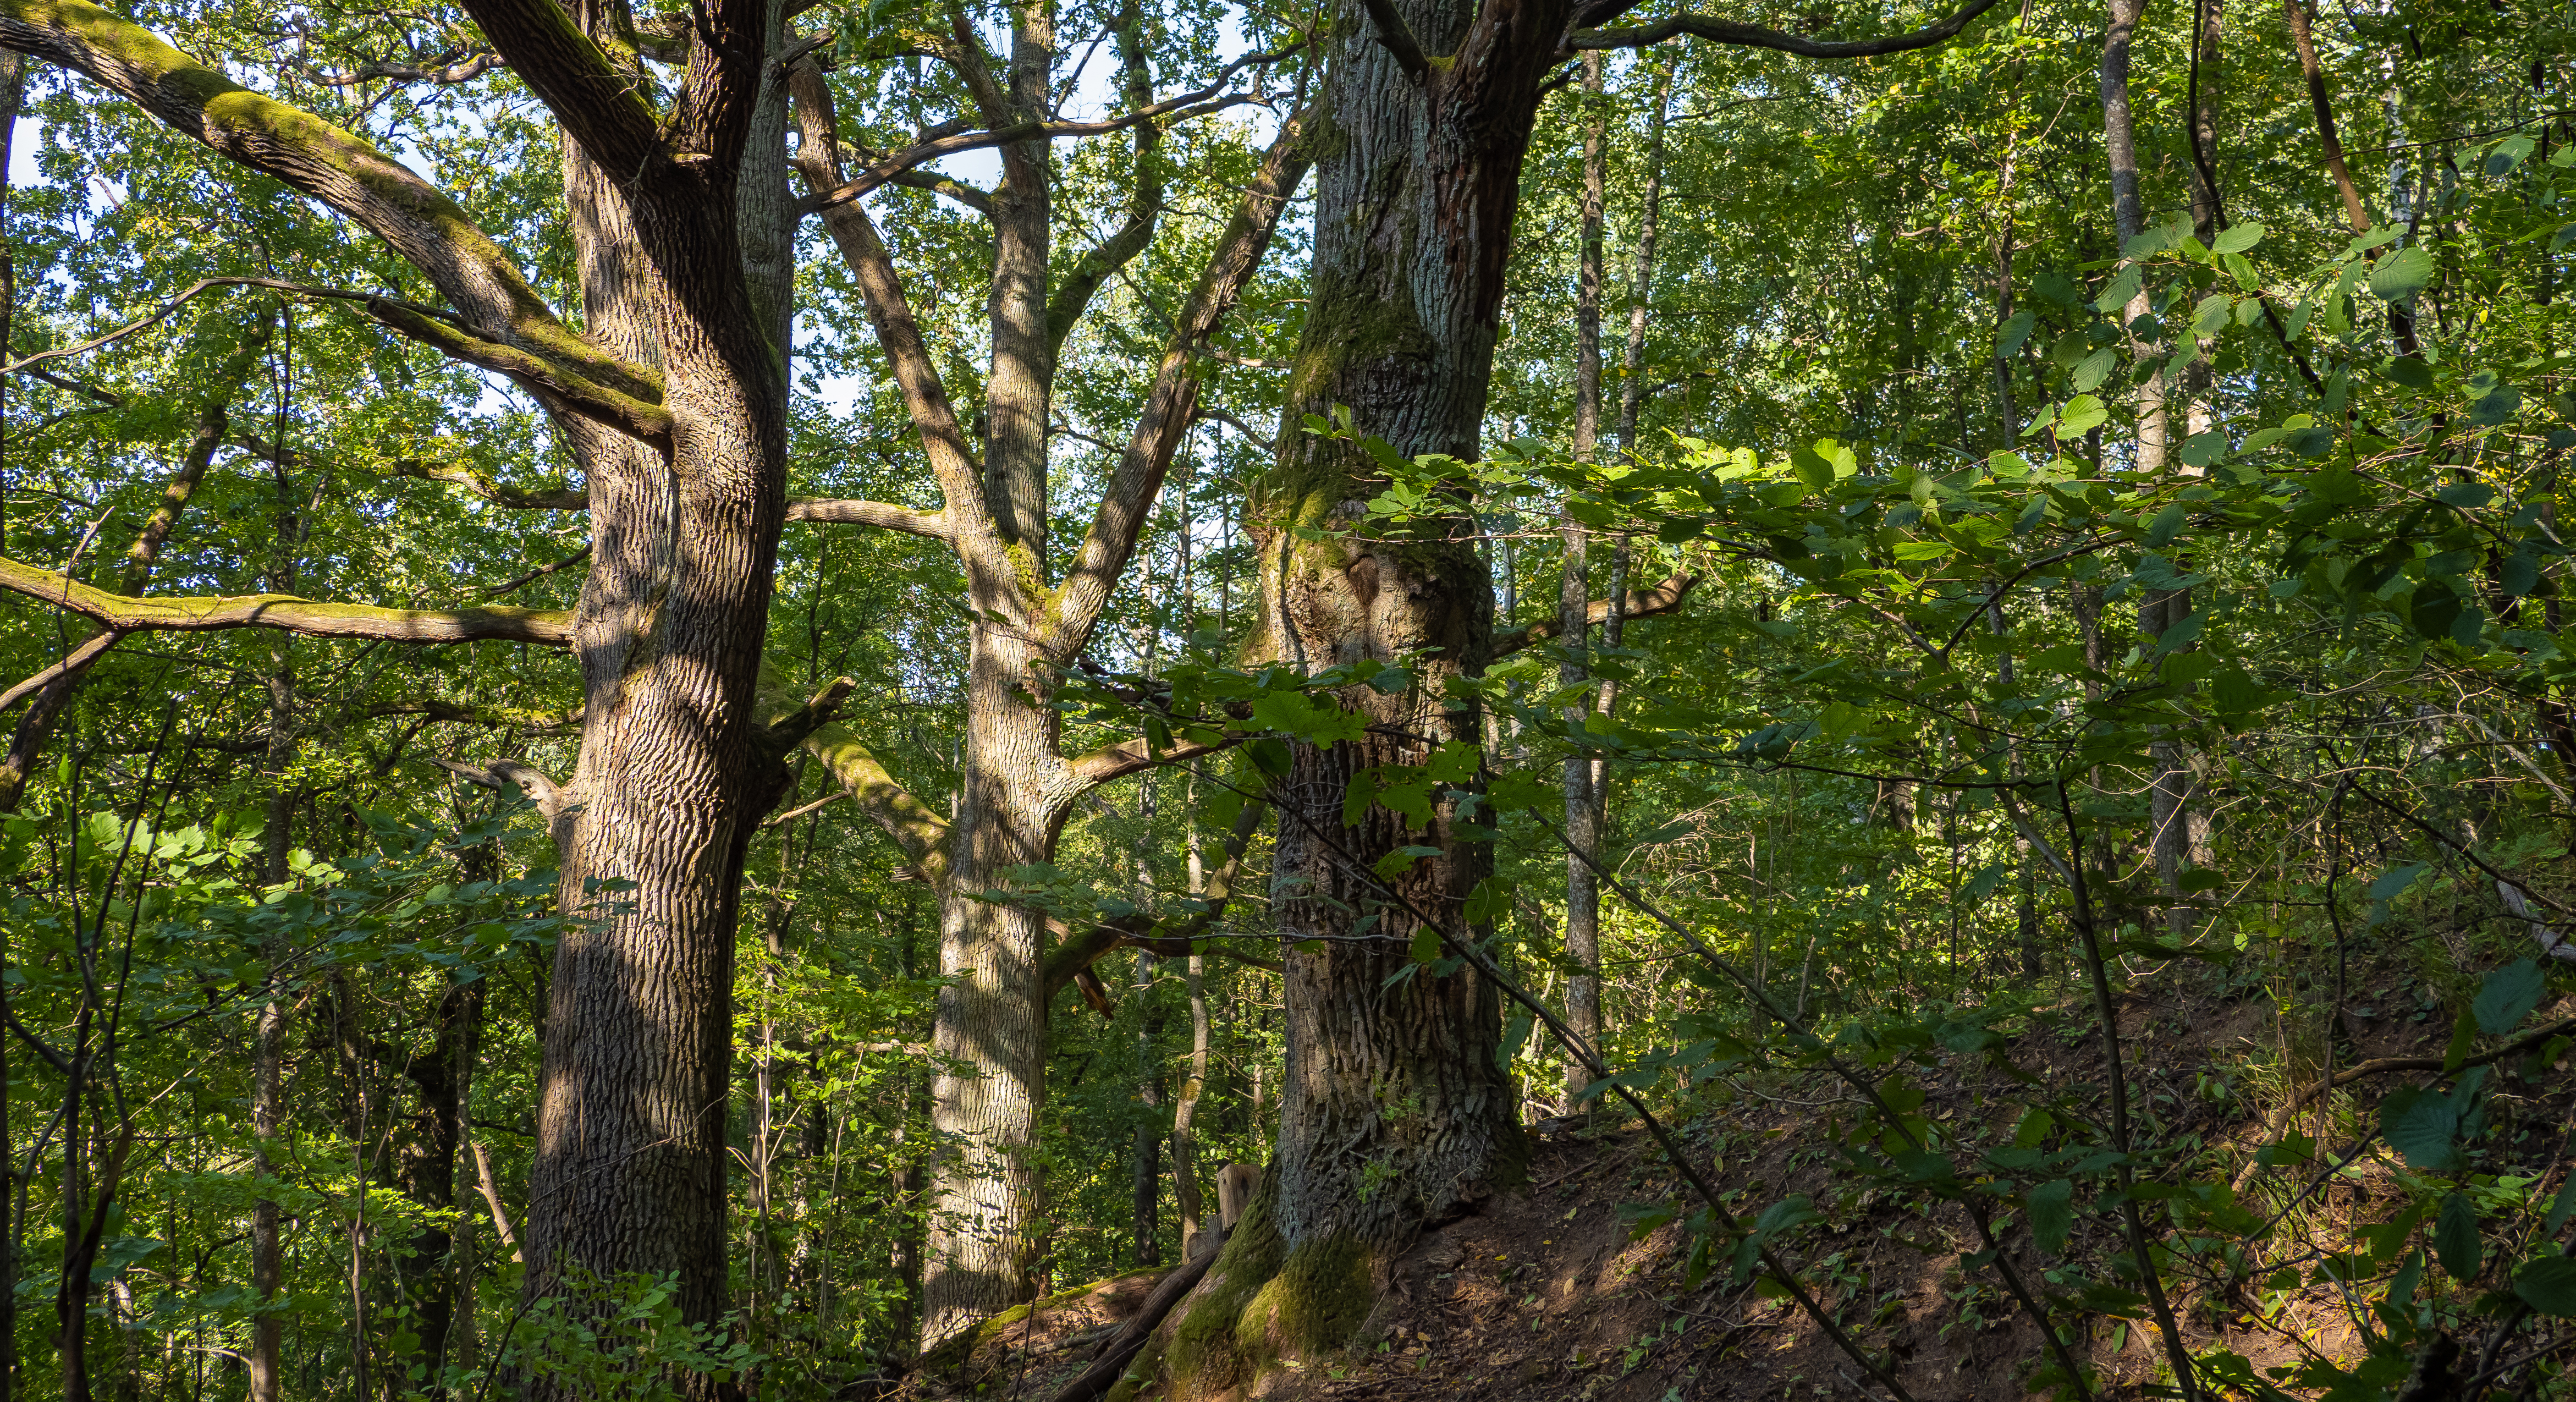 Ancient oak trees in a forest